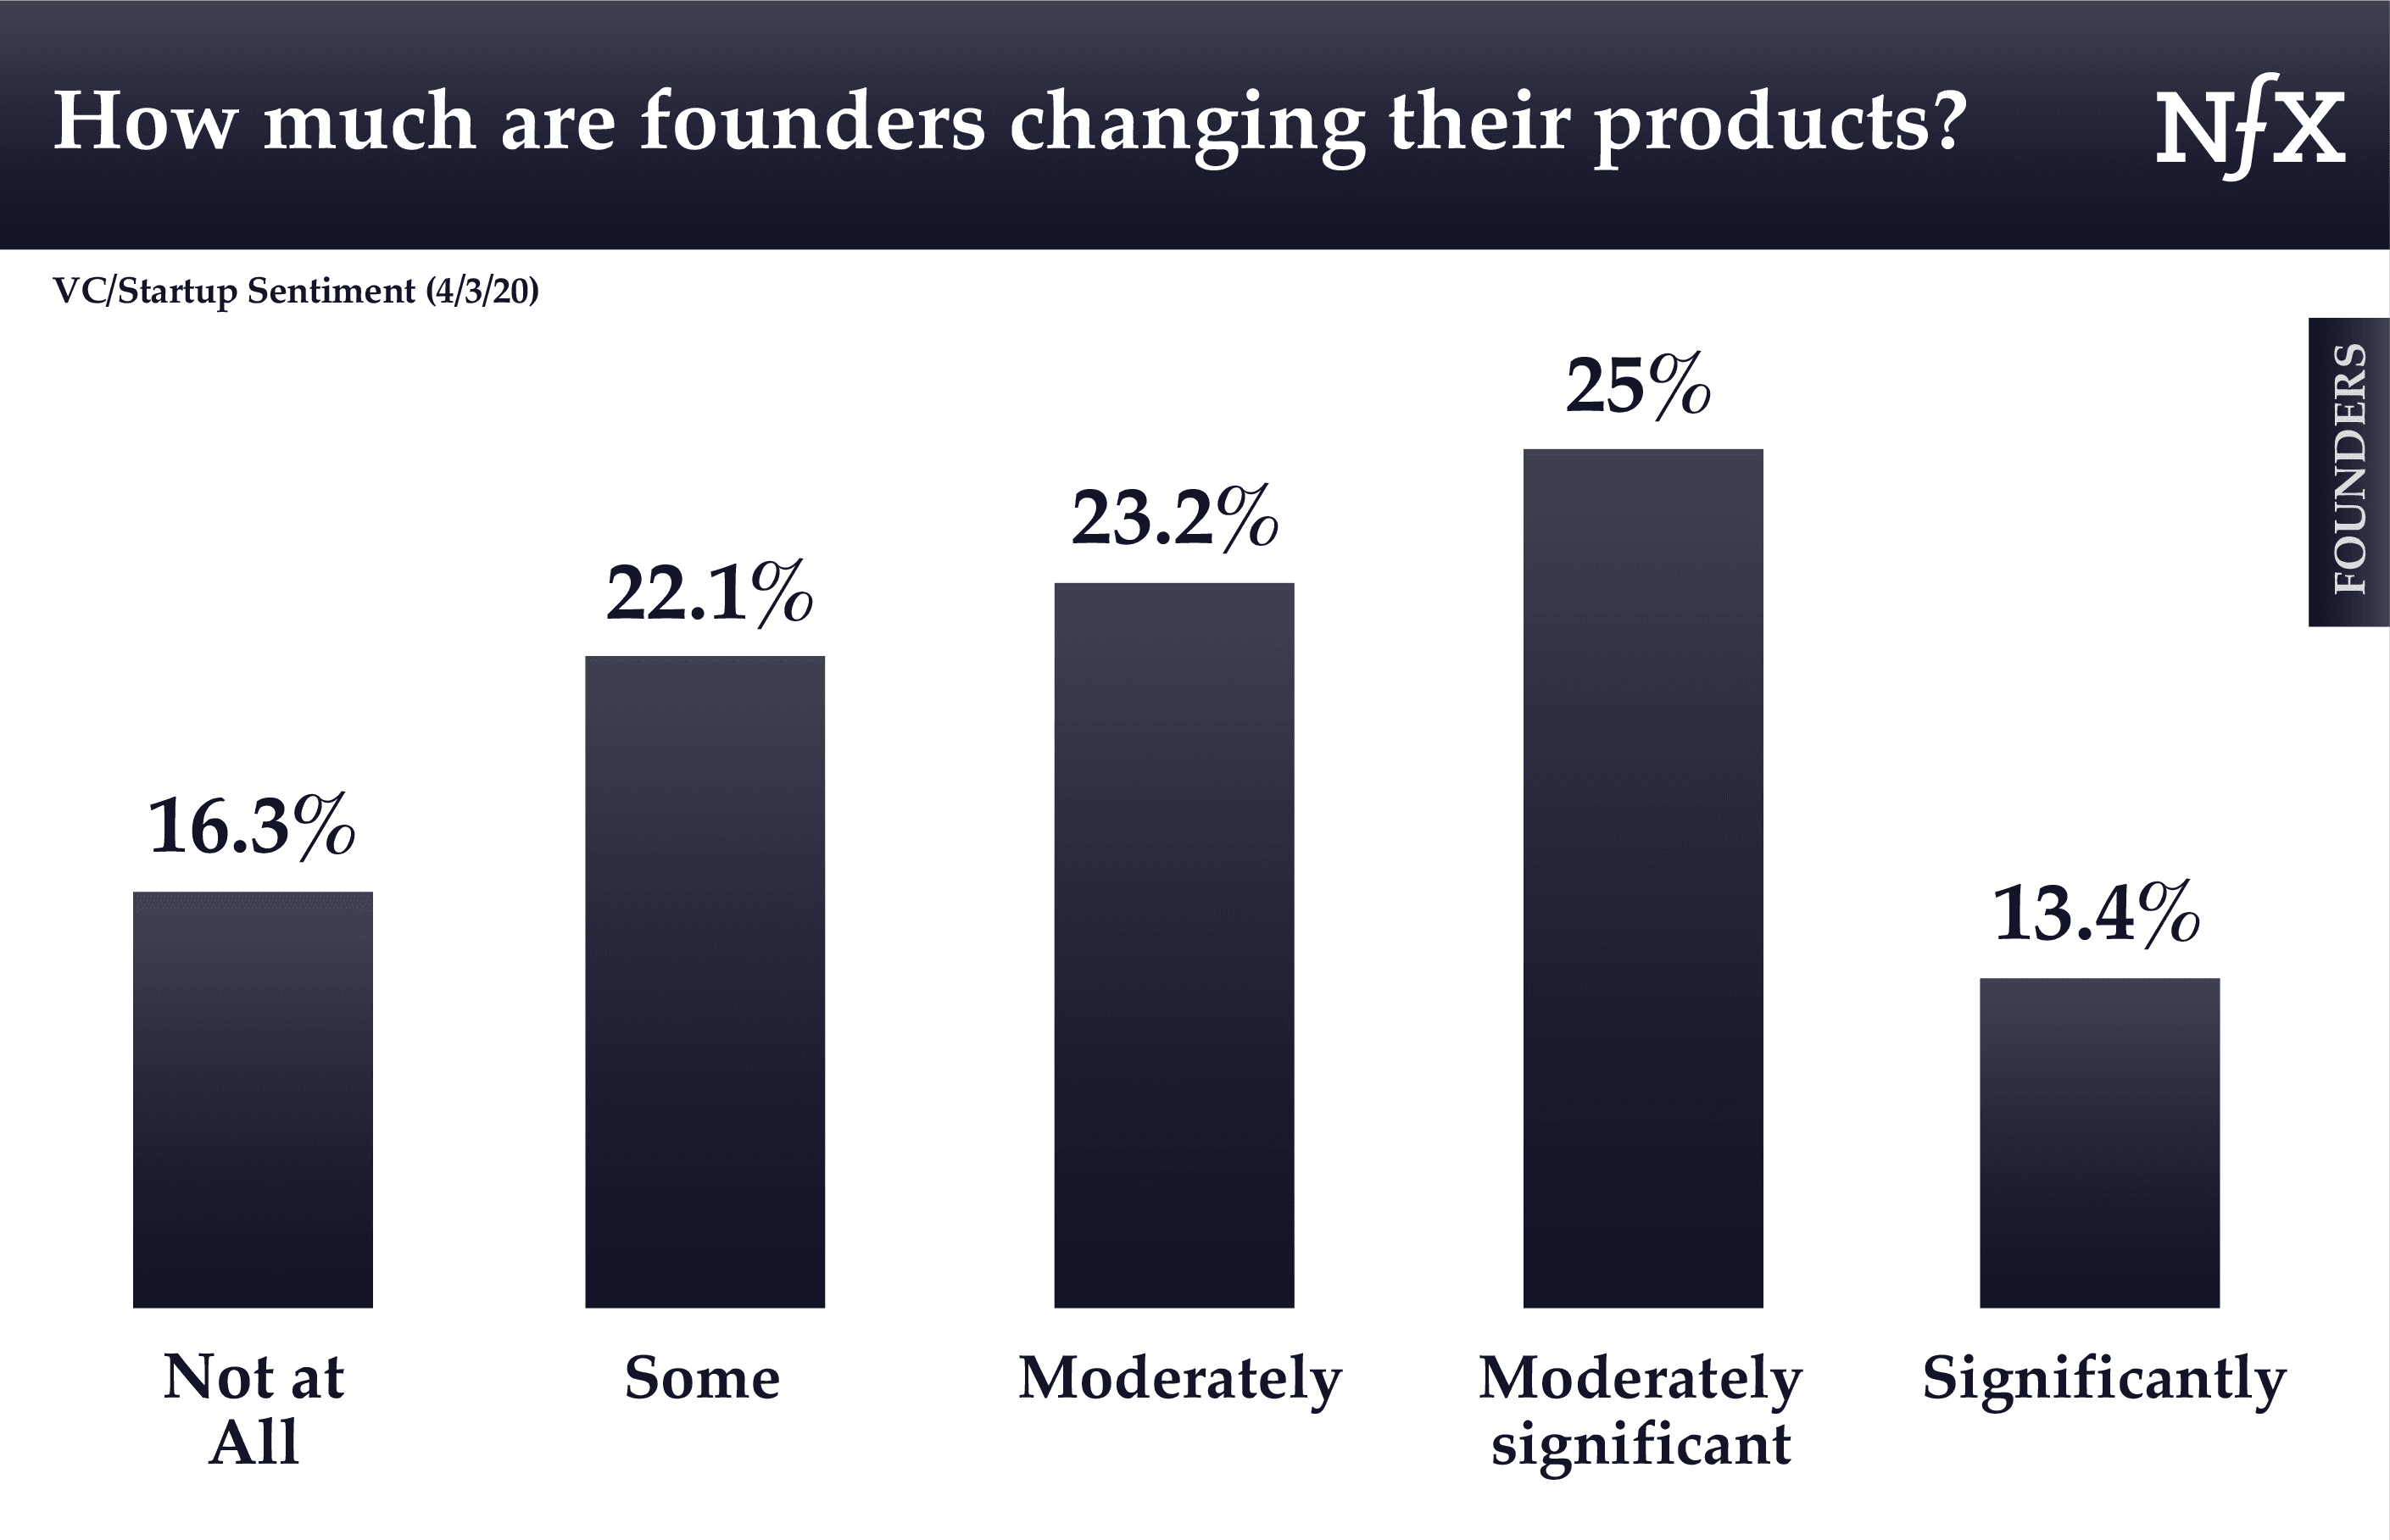 How much are founders changing their products during COVID-19?